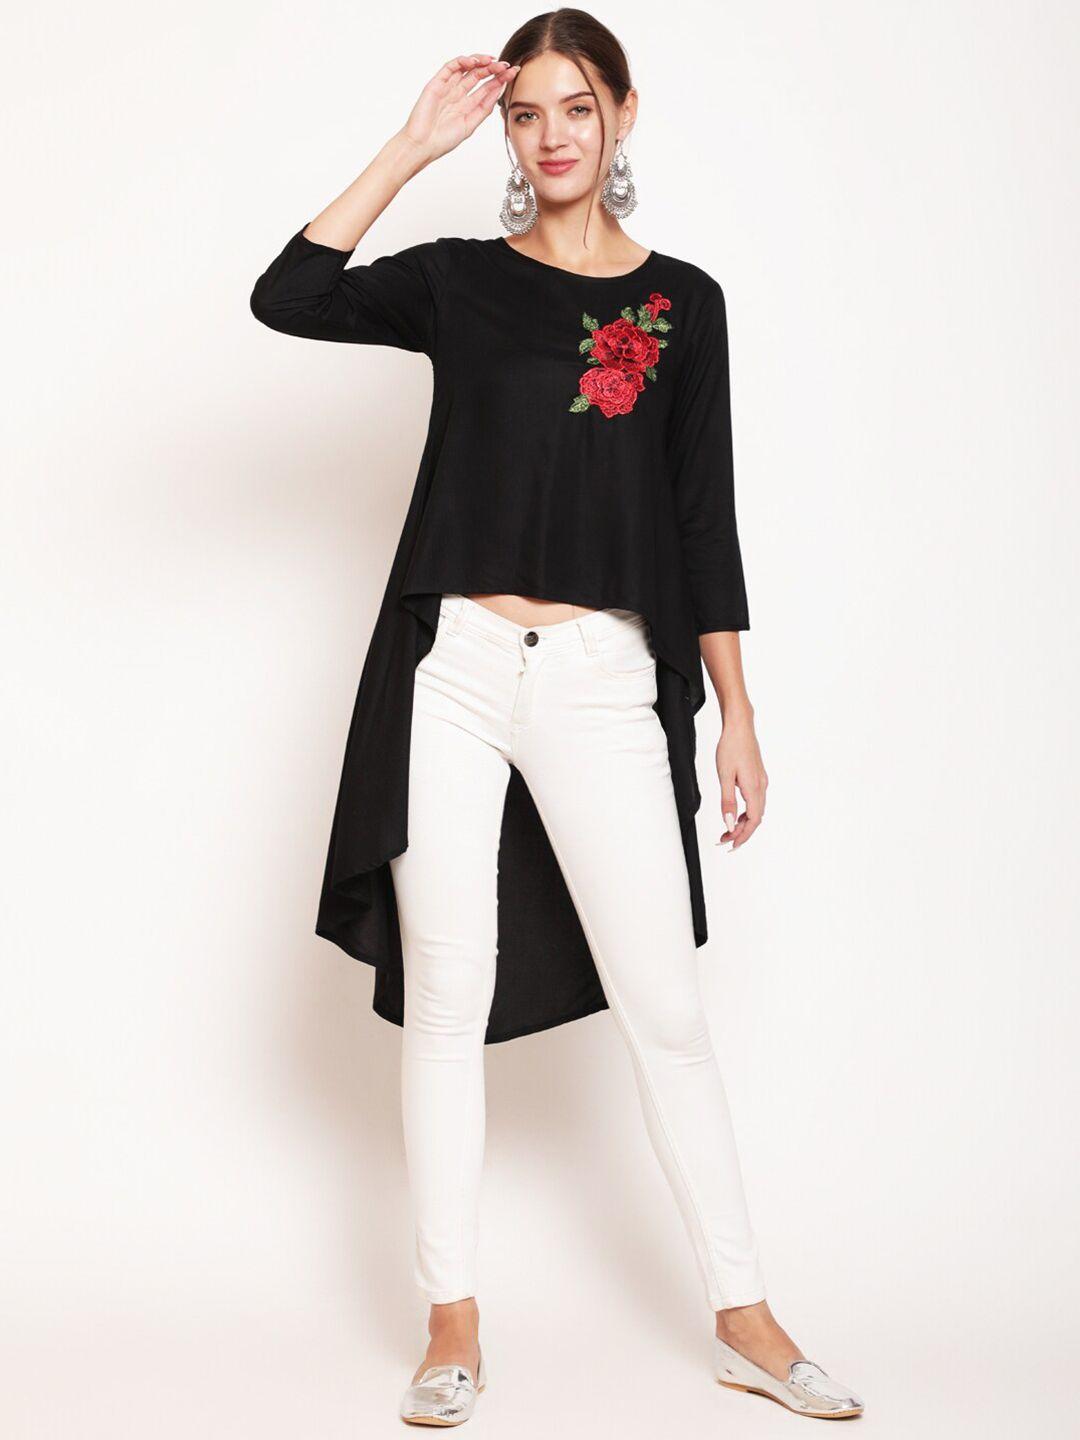 akimia-women-black-&-red-floral-embroidered-high-low-crop-top